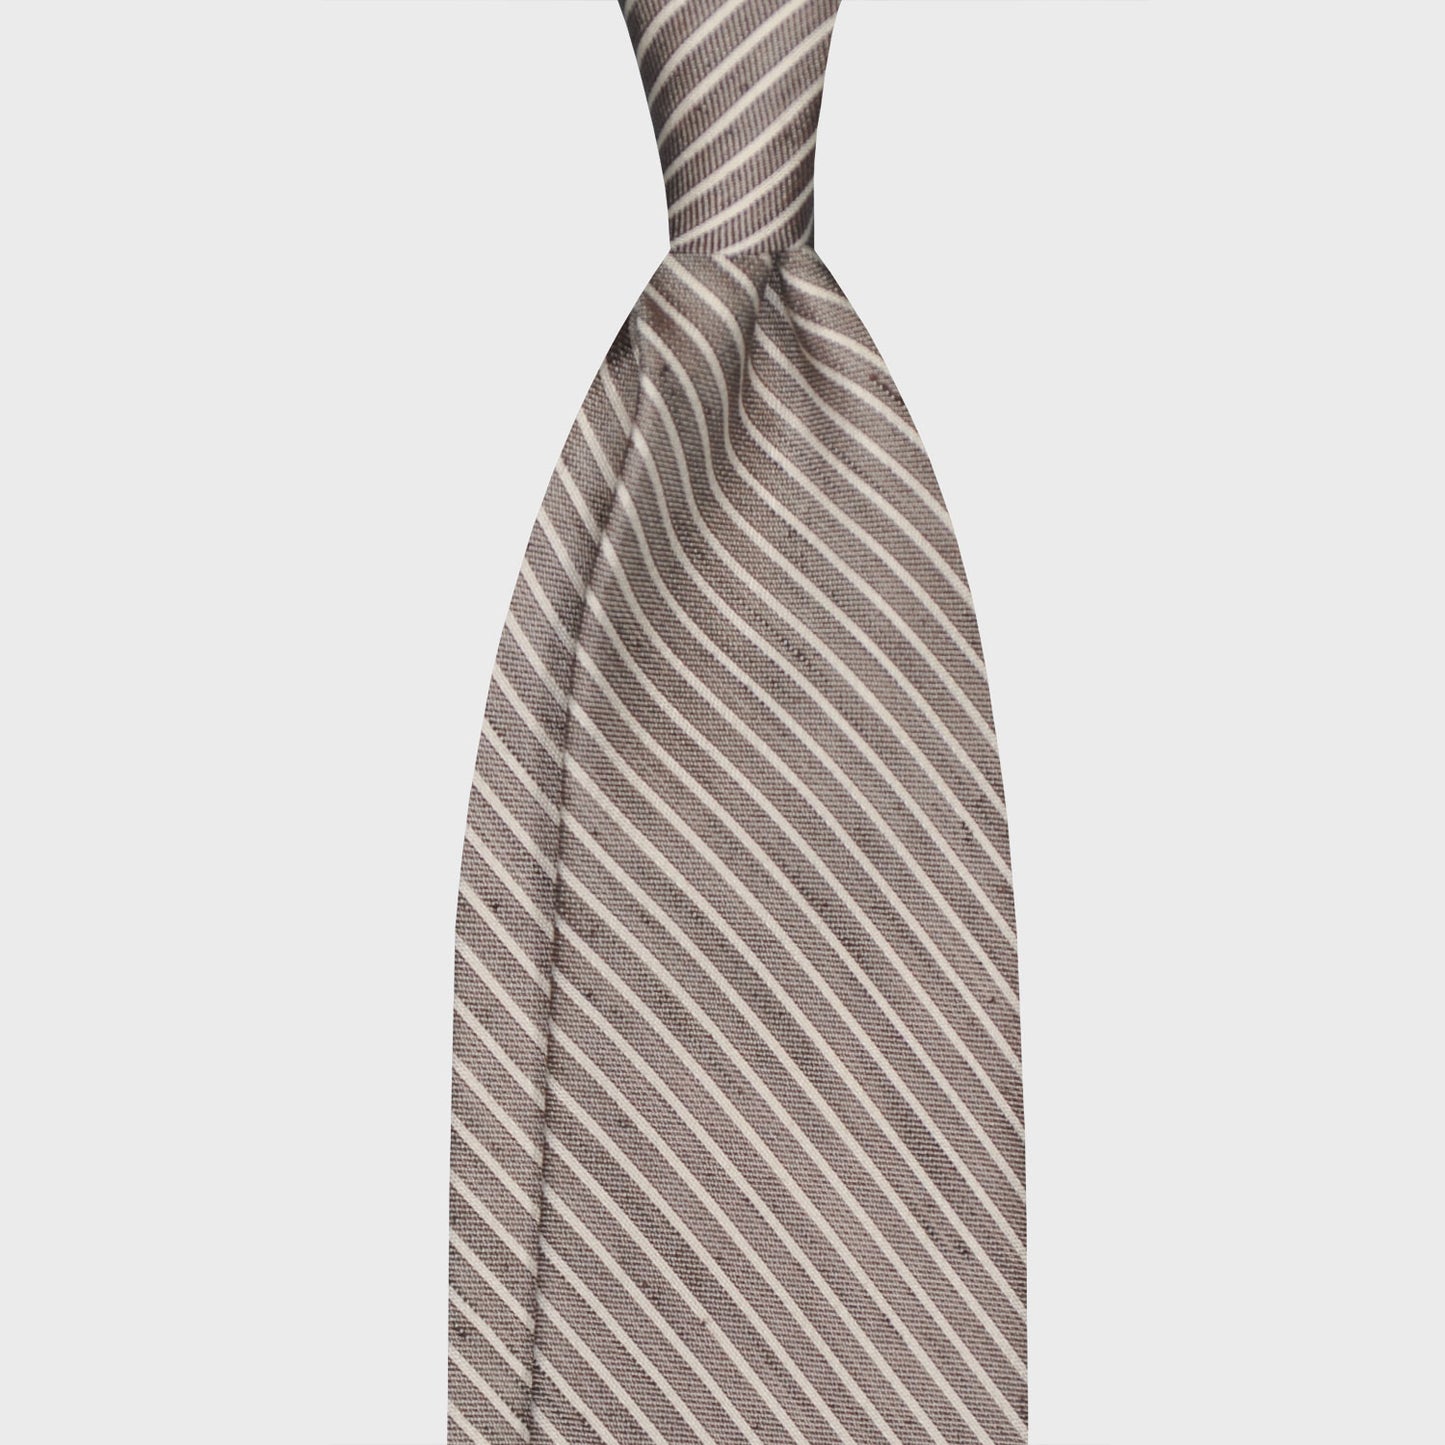 Load image into Gallery viewer, F.Marino Stripes Shantung Silk Tie 3 Folds Taupe-Wools Boutique Uomo
